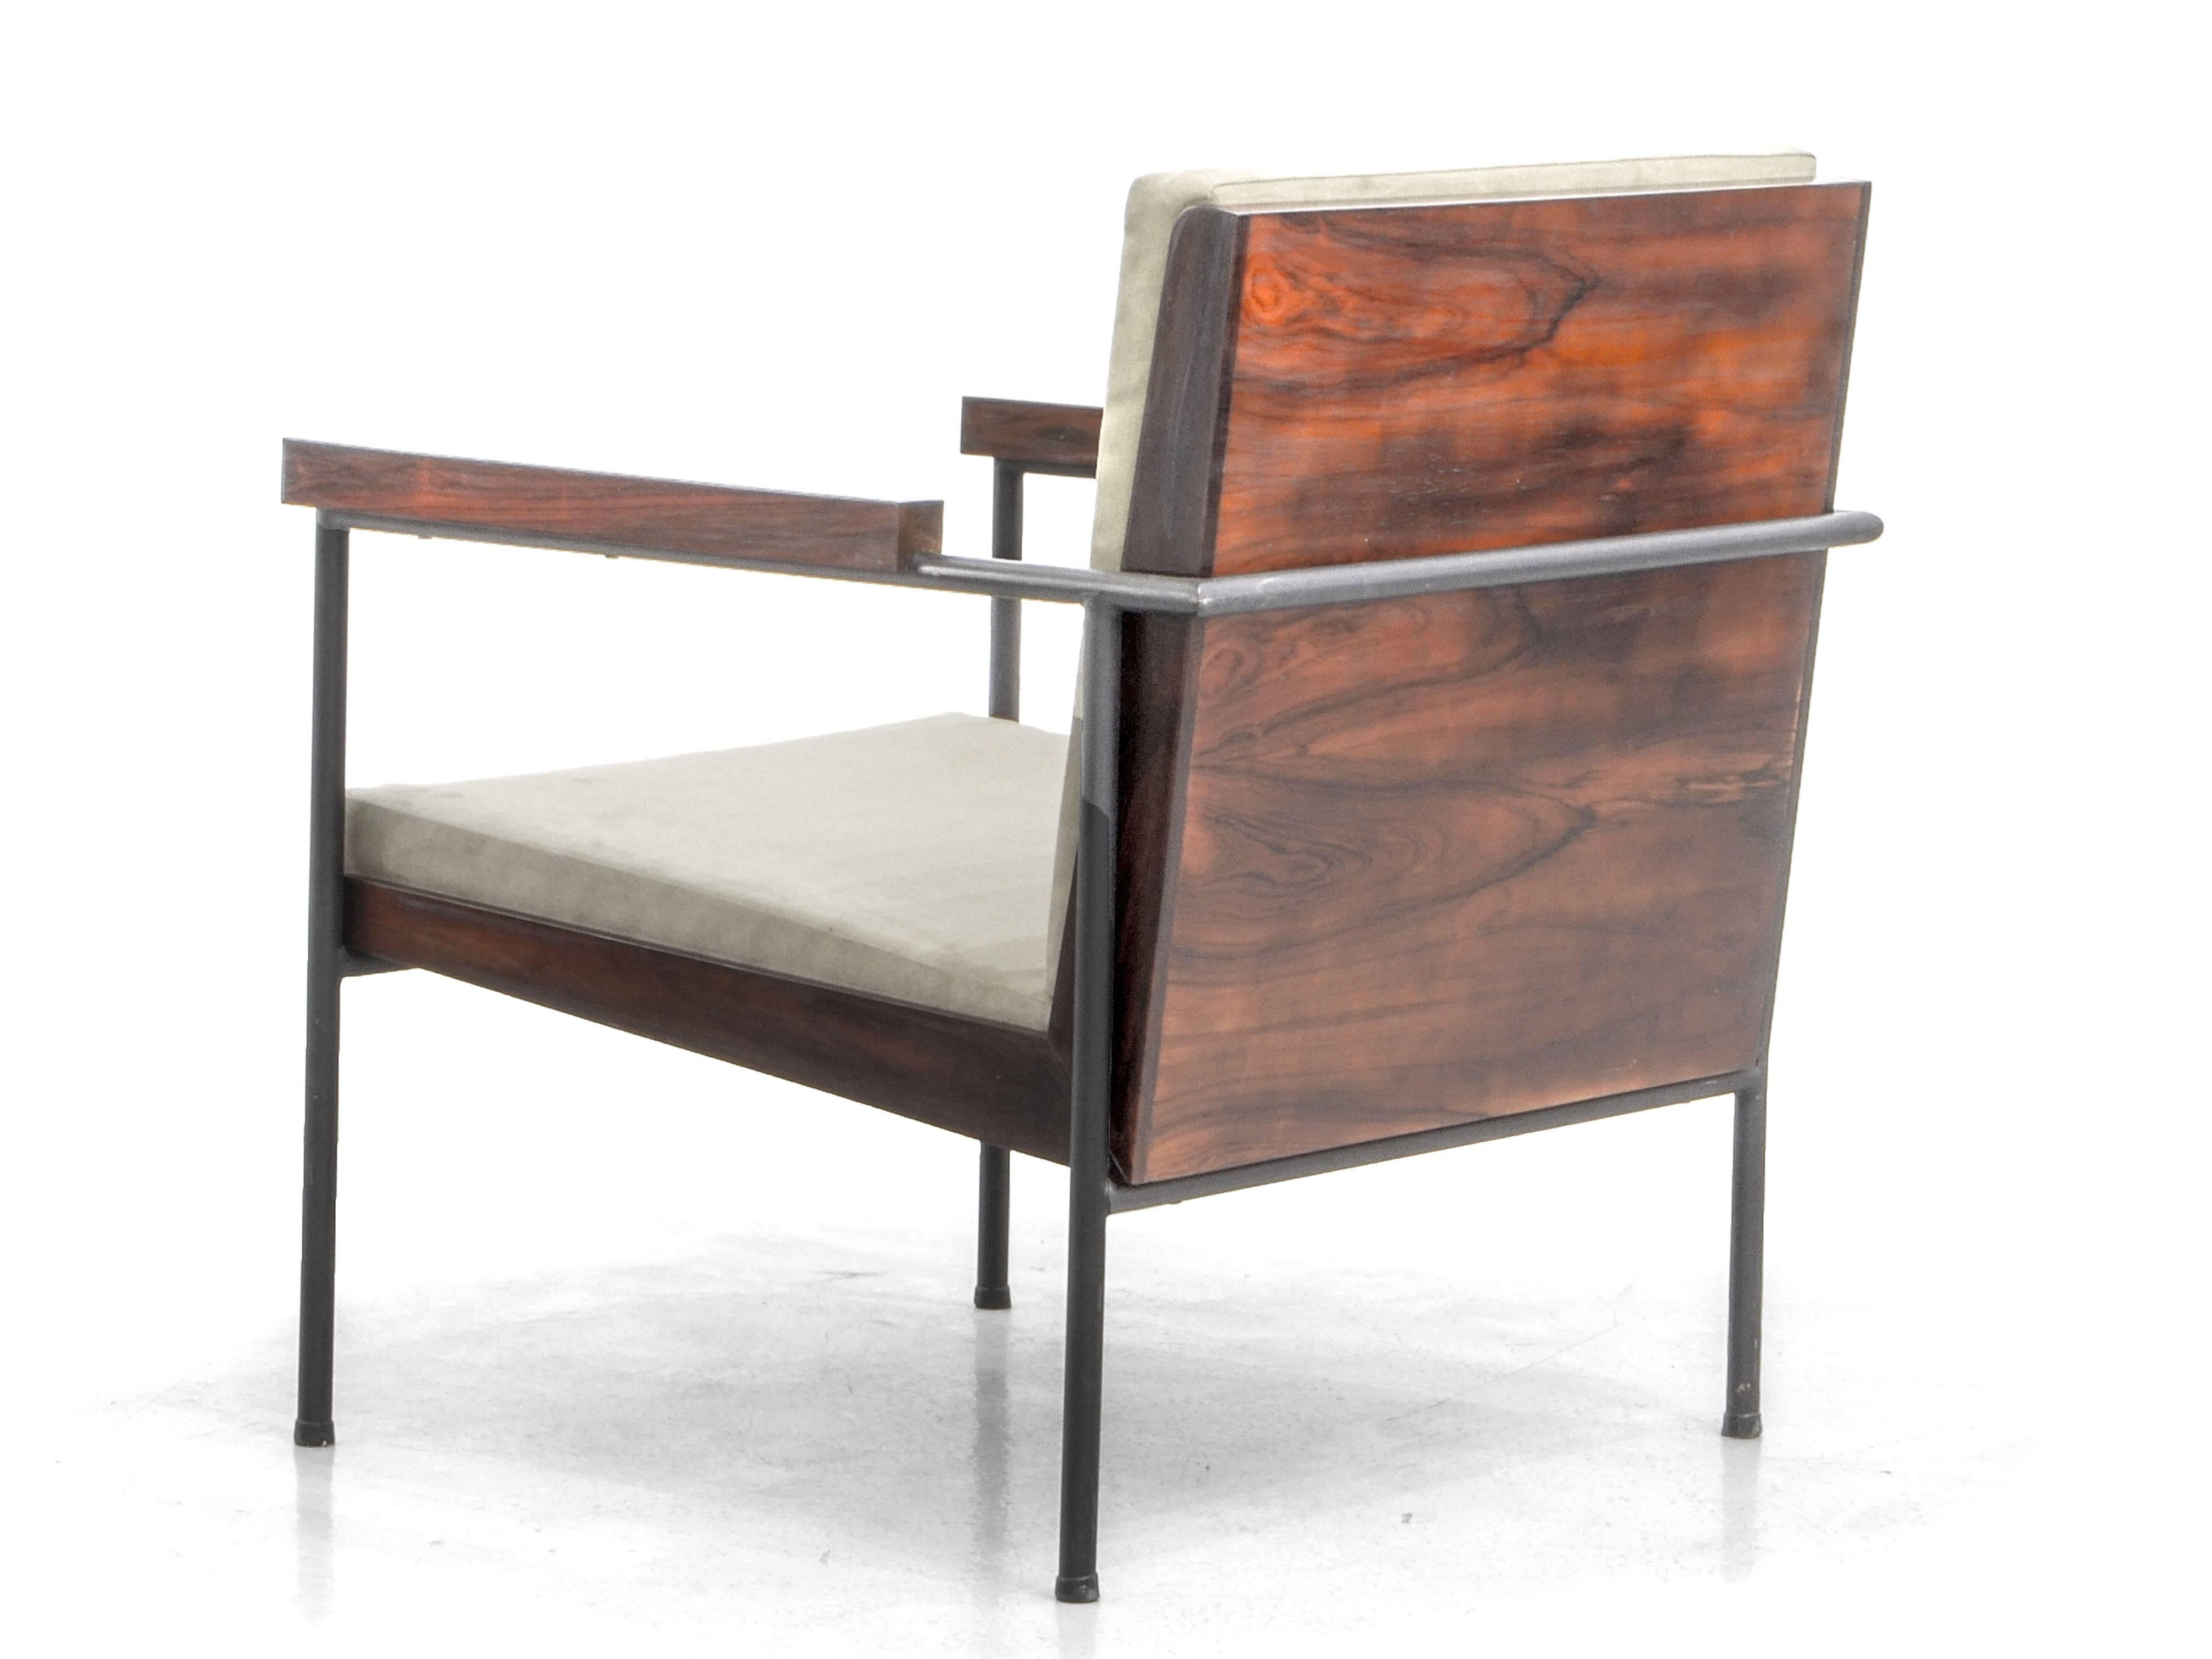 This pair of minimalist jacaranda rosewood armchairs was produced by Geraldo de Barros, one the greatest designers of the Brazilian midcentury, but also an acclaimed painter and photographer.

This armchair is extremely comfortable and an excellent